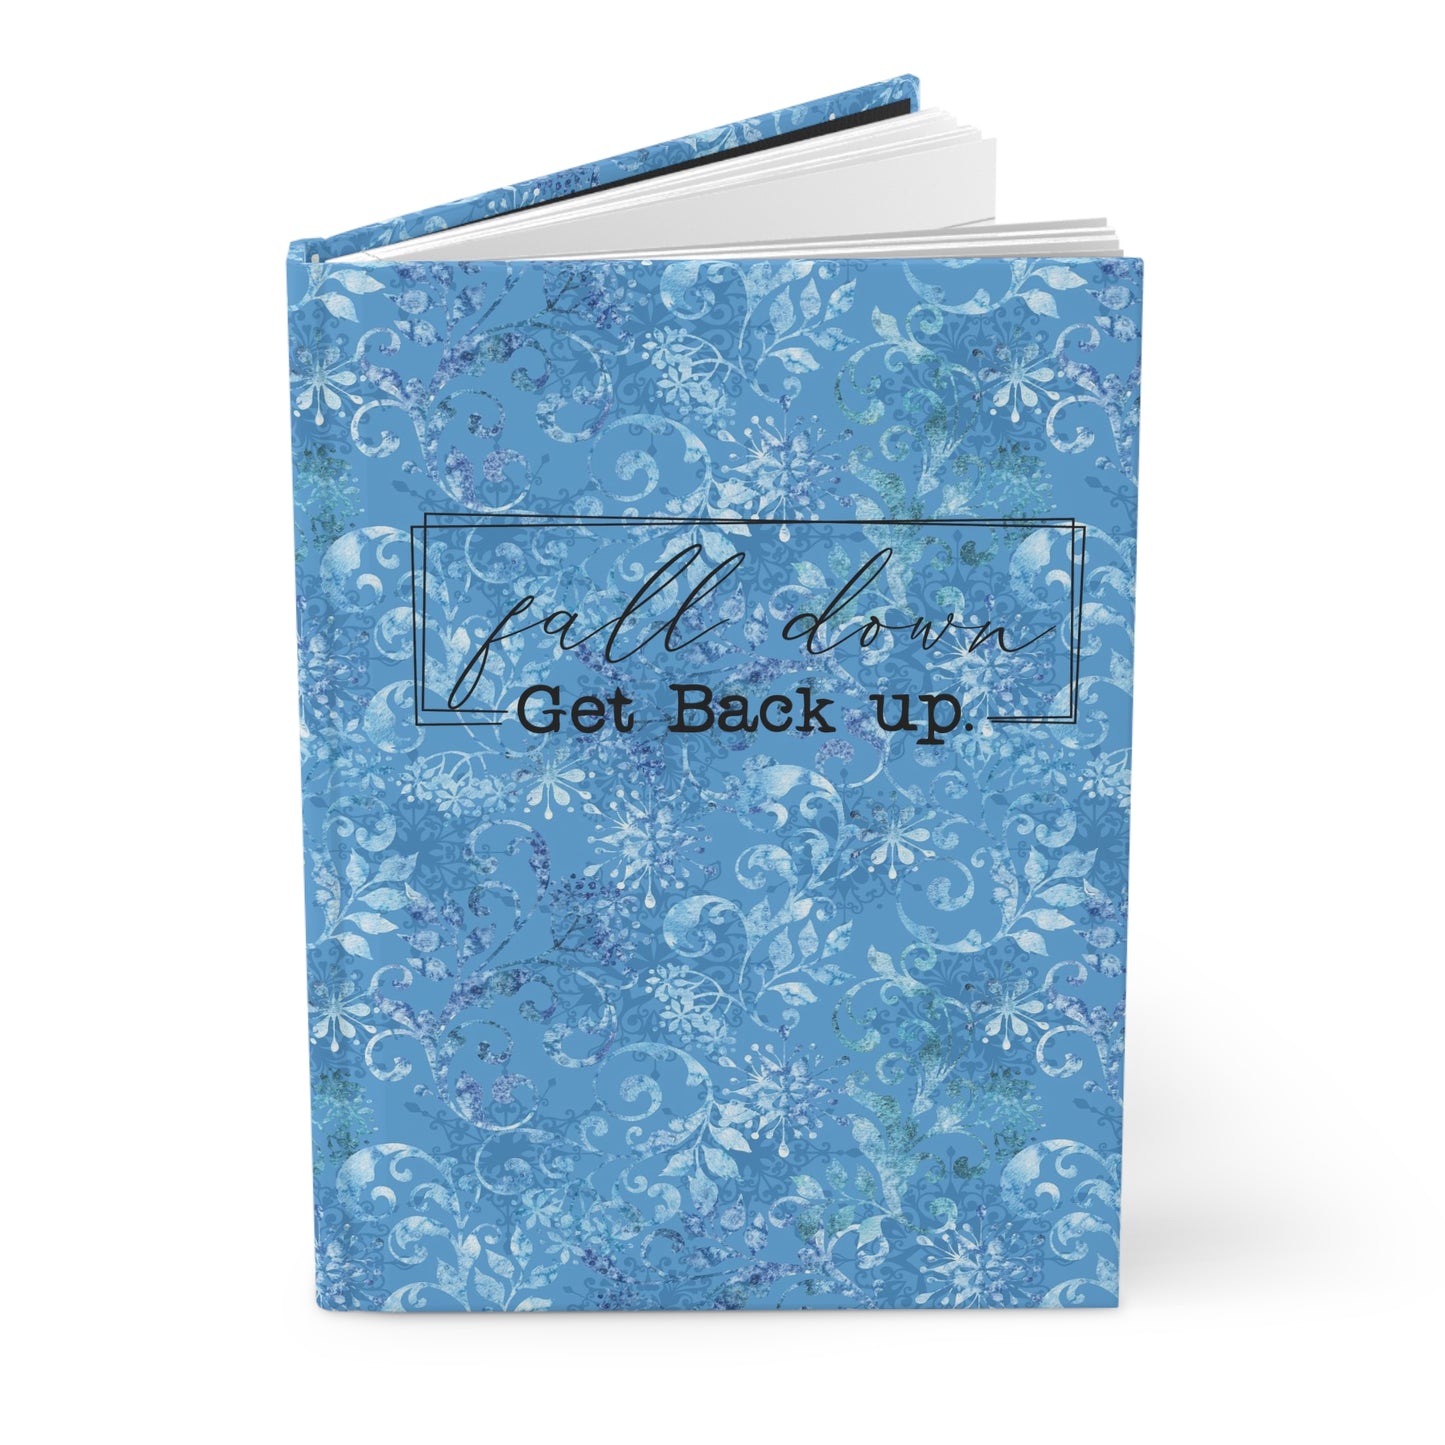 Fall Down, Get Back Up - Inspirational Quote - Beautiful Everyday Journaling  - Blue Winter Paper 1 - Hardcover Journal Matte